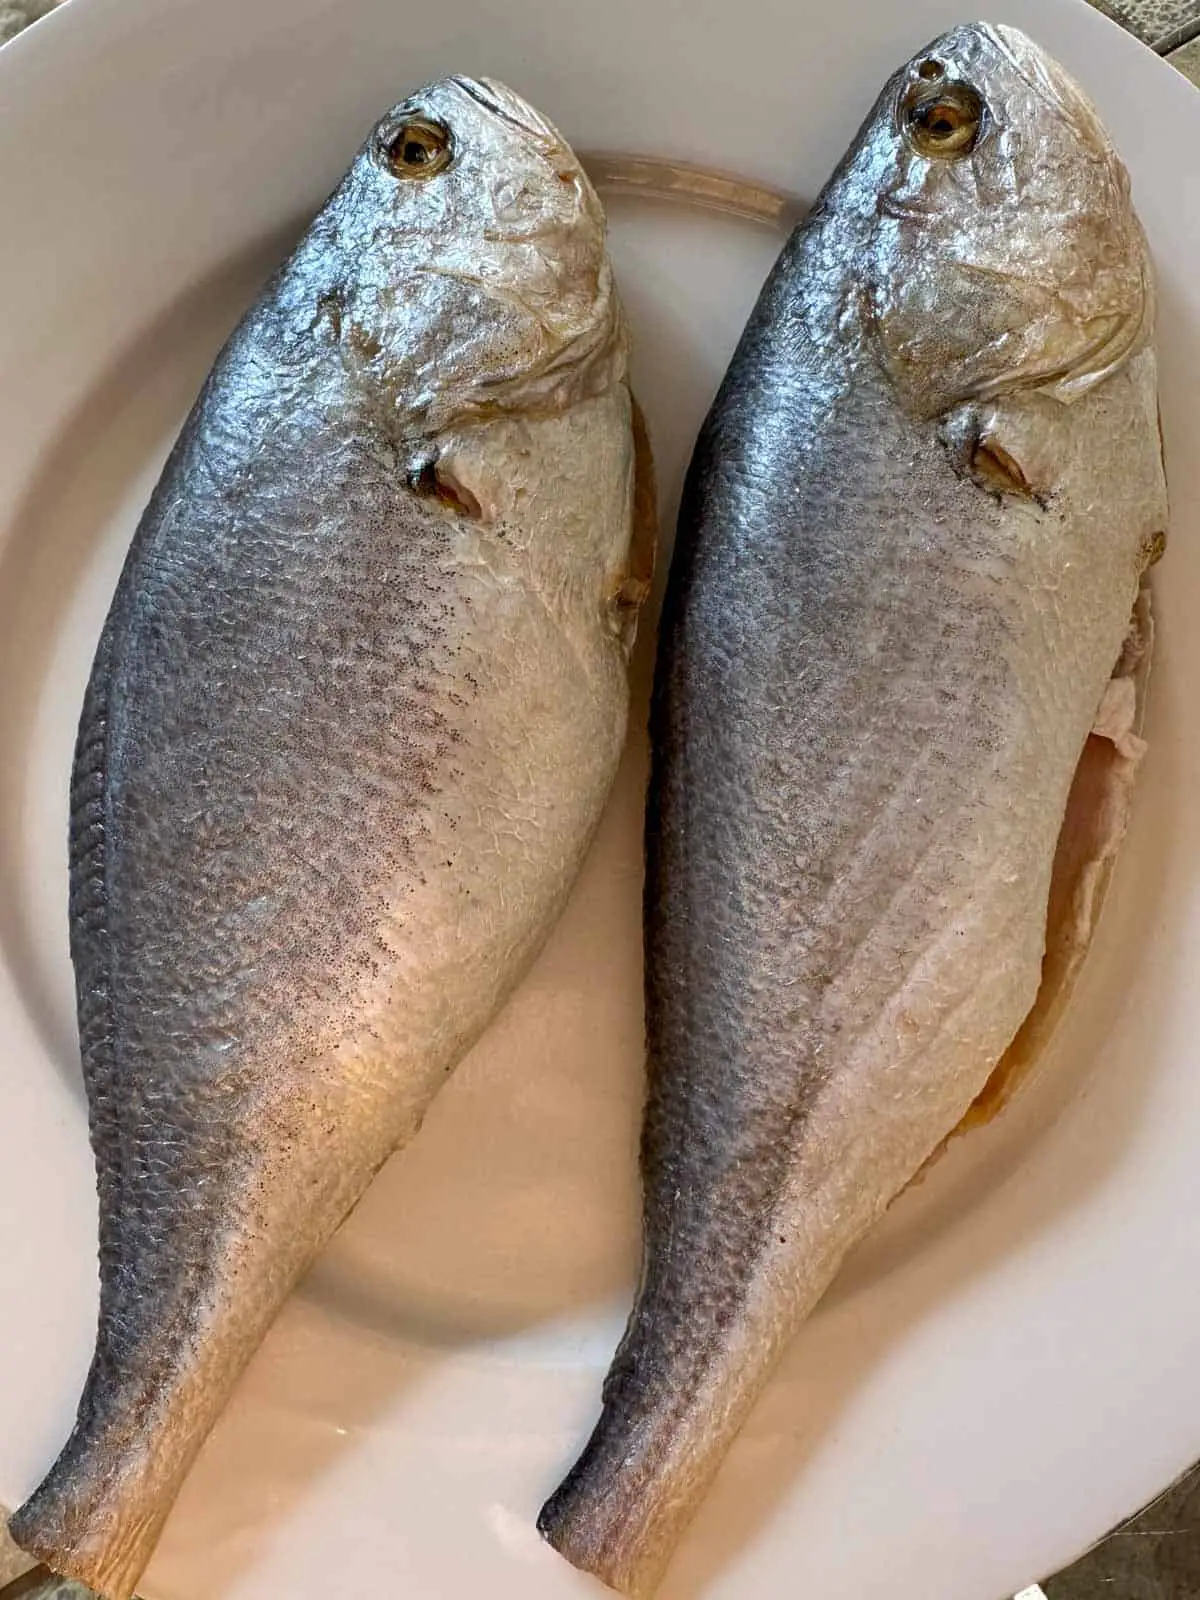 Two corvina on a white plate which have been cleaned and the fins have been cut off.